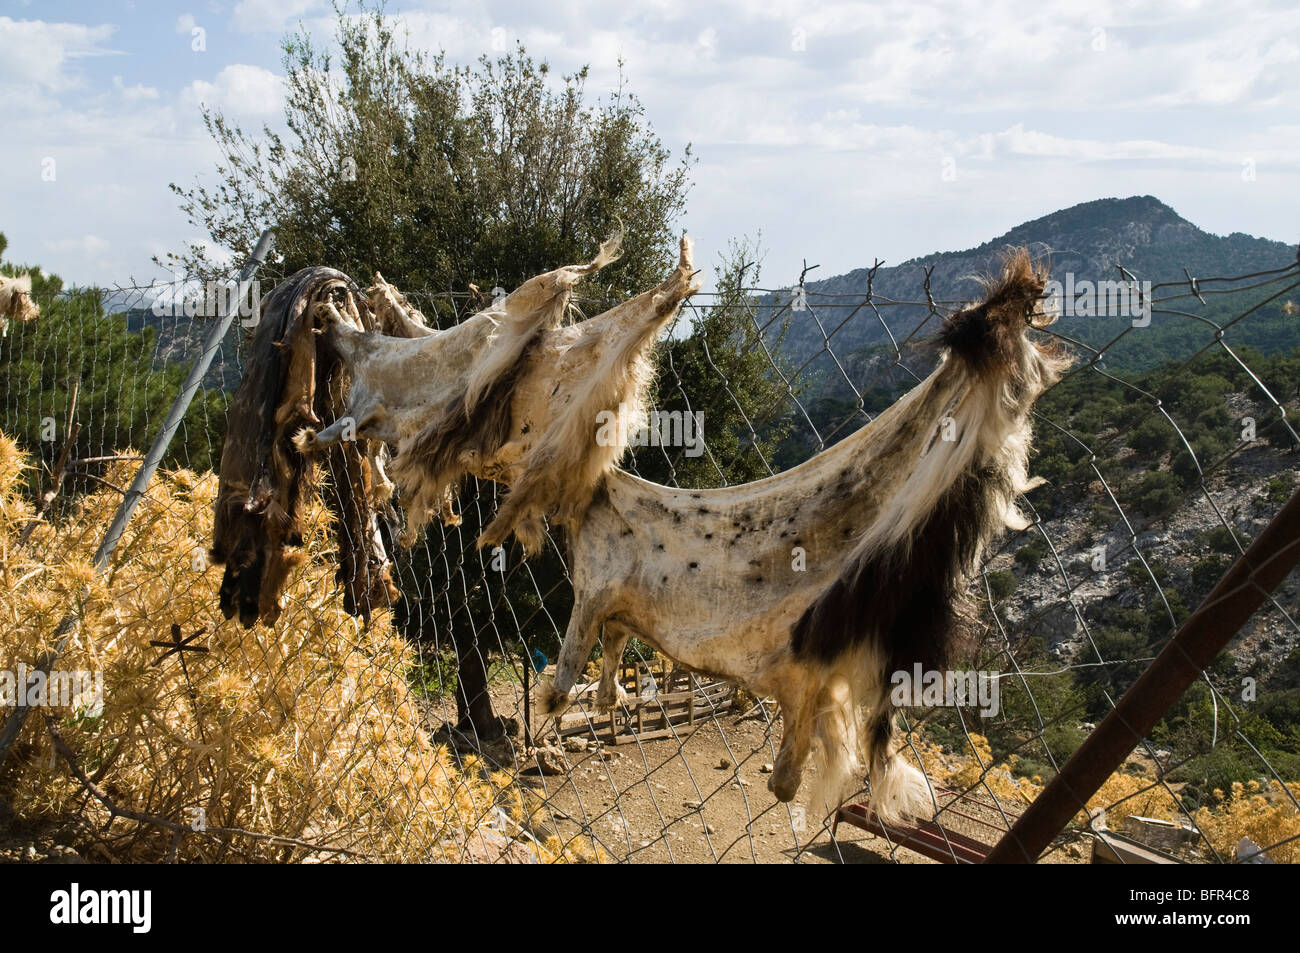 dh  FARMING GREECE CRETE Goats skin pelts drying on fence animal skins Stock Photo